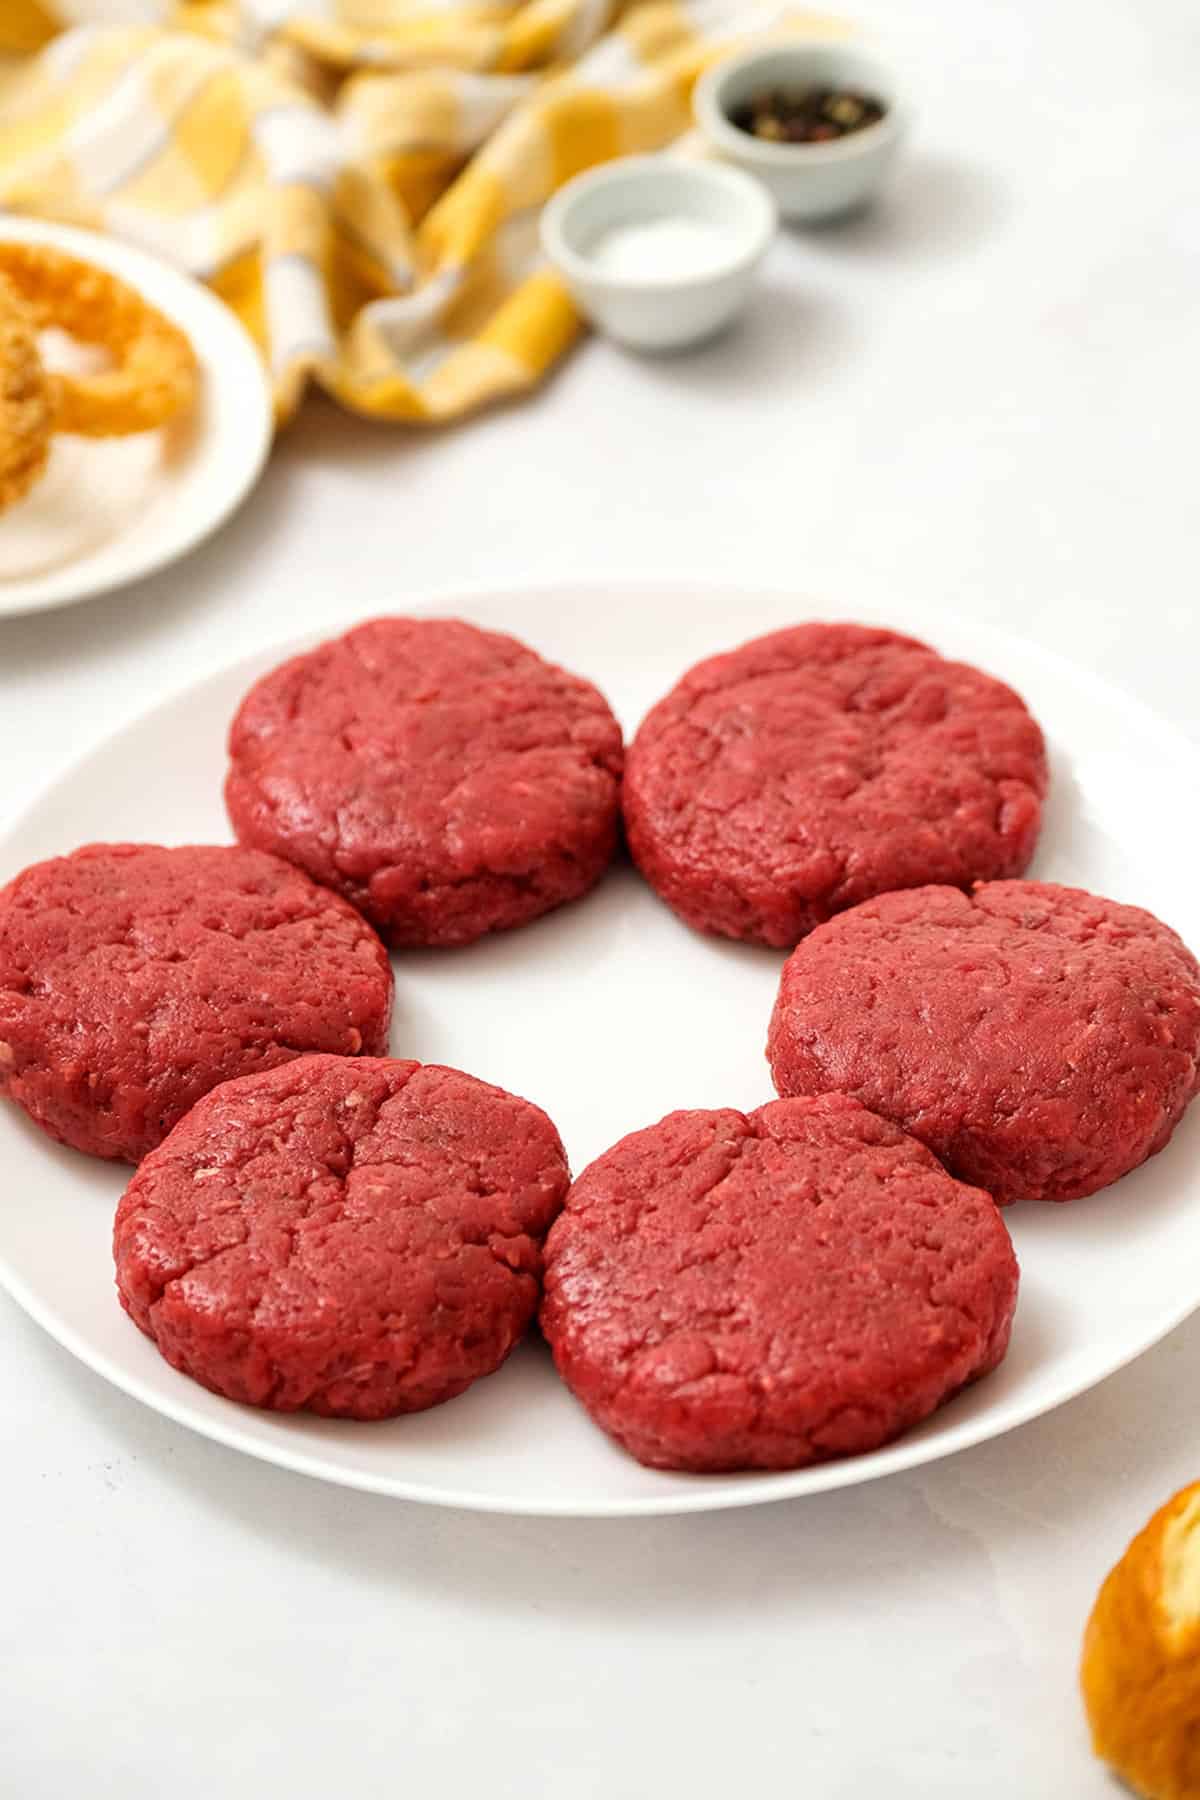 Formed and Seasoned Ground Beef into Patties for Rodeo Burger King